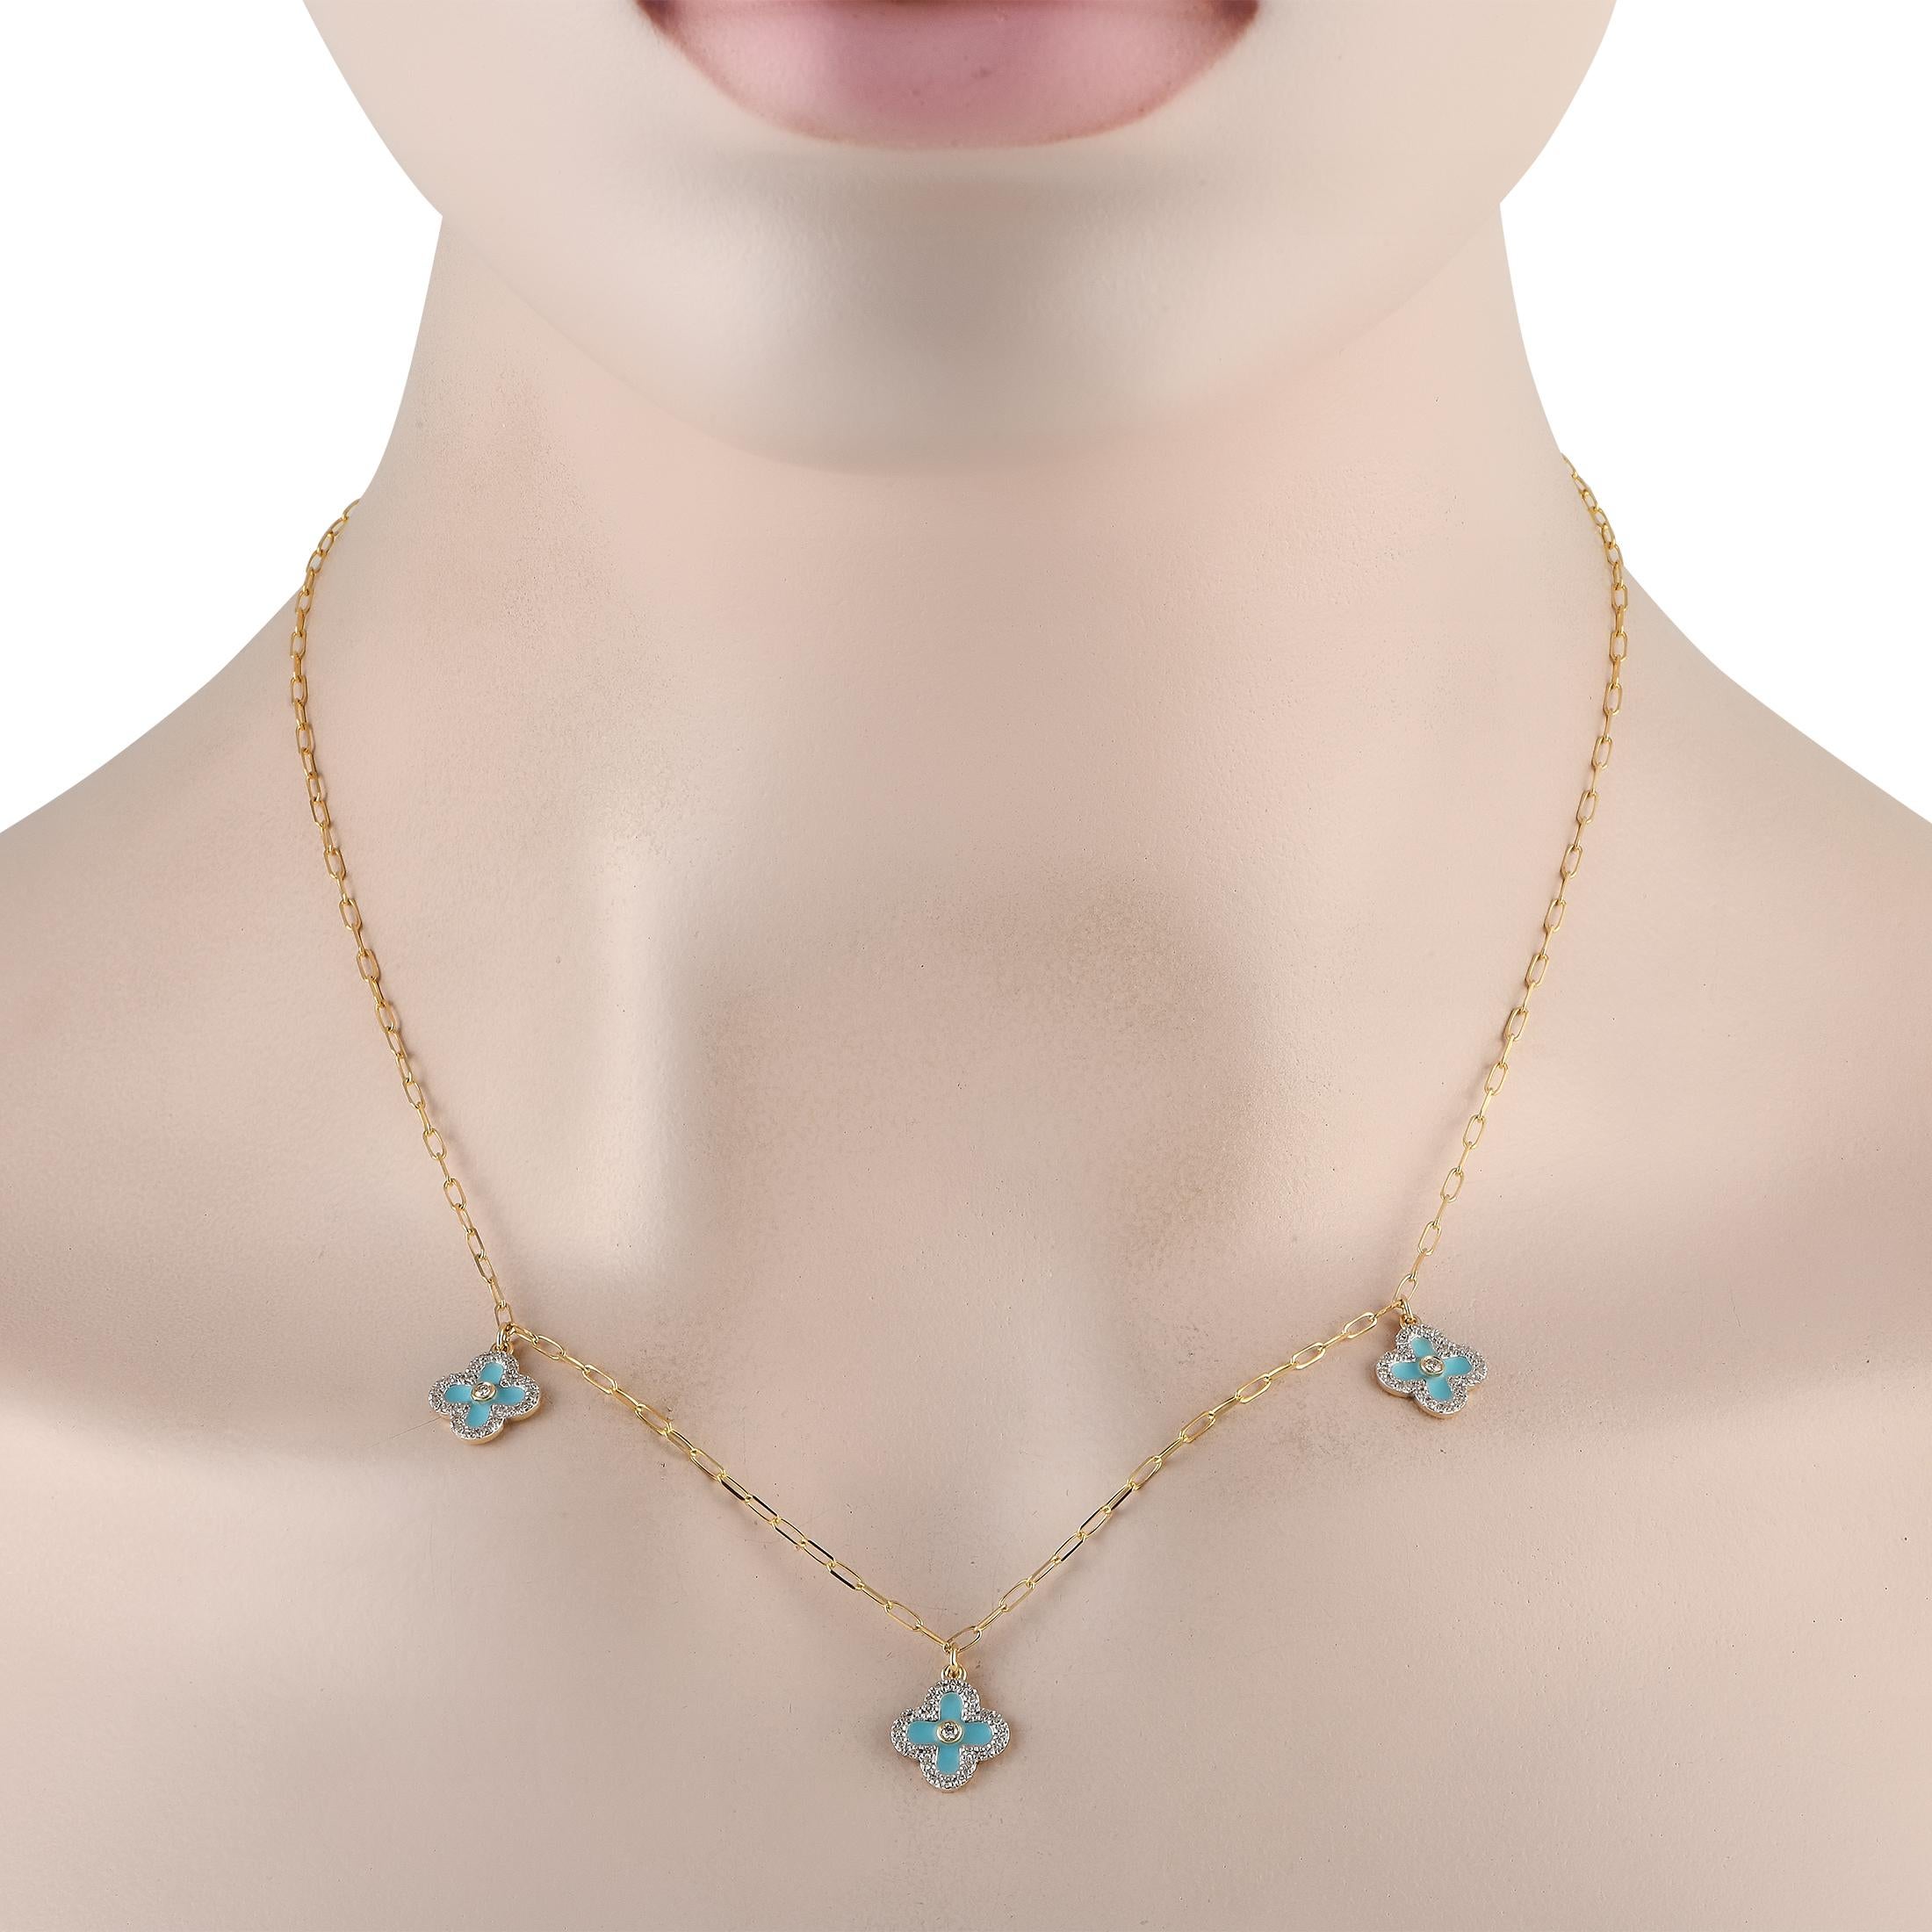 This luxury necklace is instantly captivating. Suspended from a chic 18 paperclip chain, a trio of blue clover-shaped pendants measuring 0.45 round add a pop of color to this unforgettable accessory. This necklace is crafted from opulent 14K Yellow